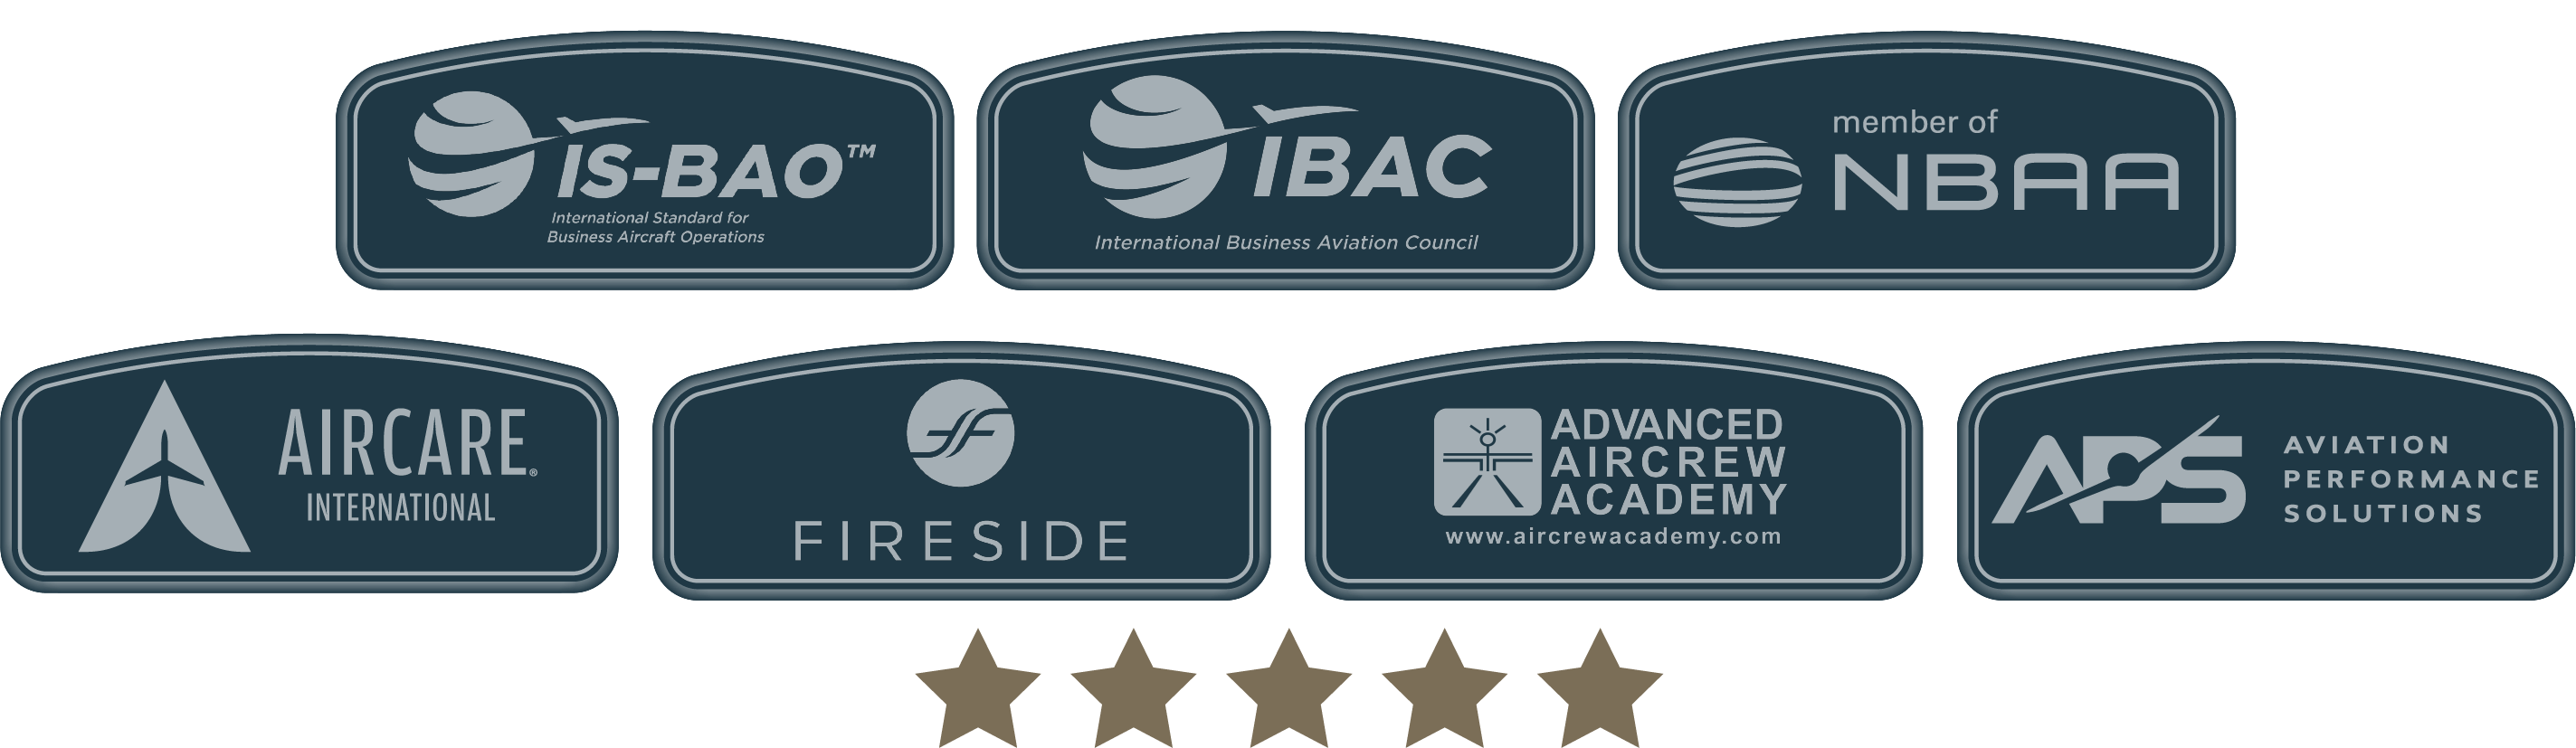 Supporting partner links IS-BAO, IBAC, Fireside Partners, Advanced Aircrew Academy, NBAA